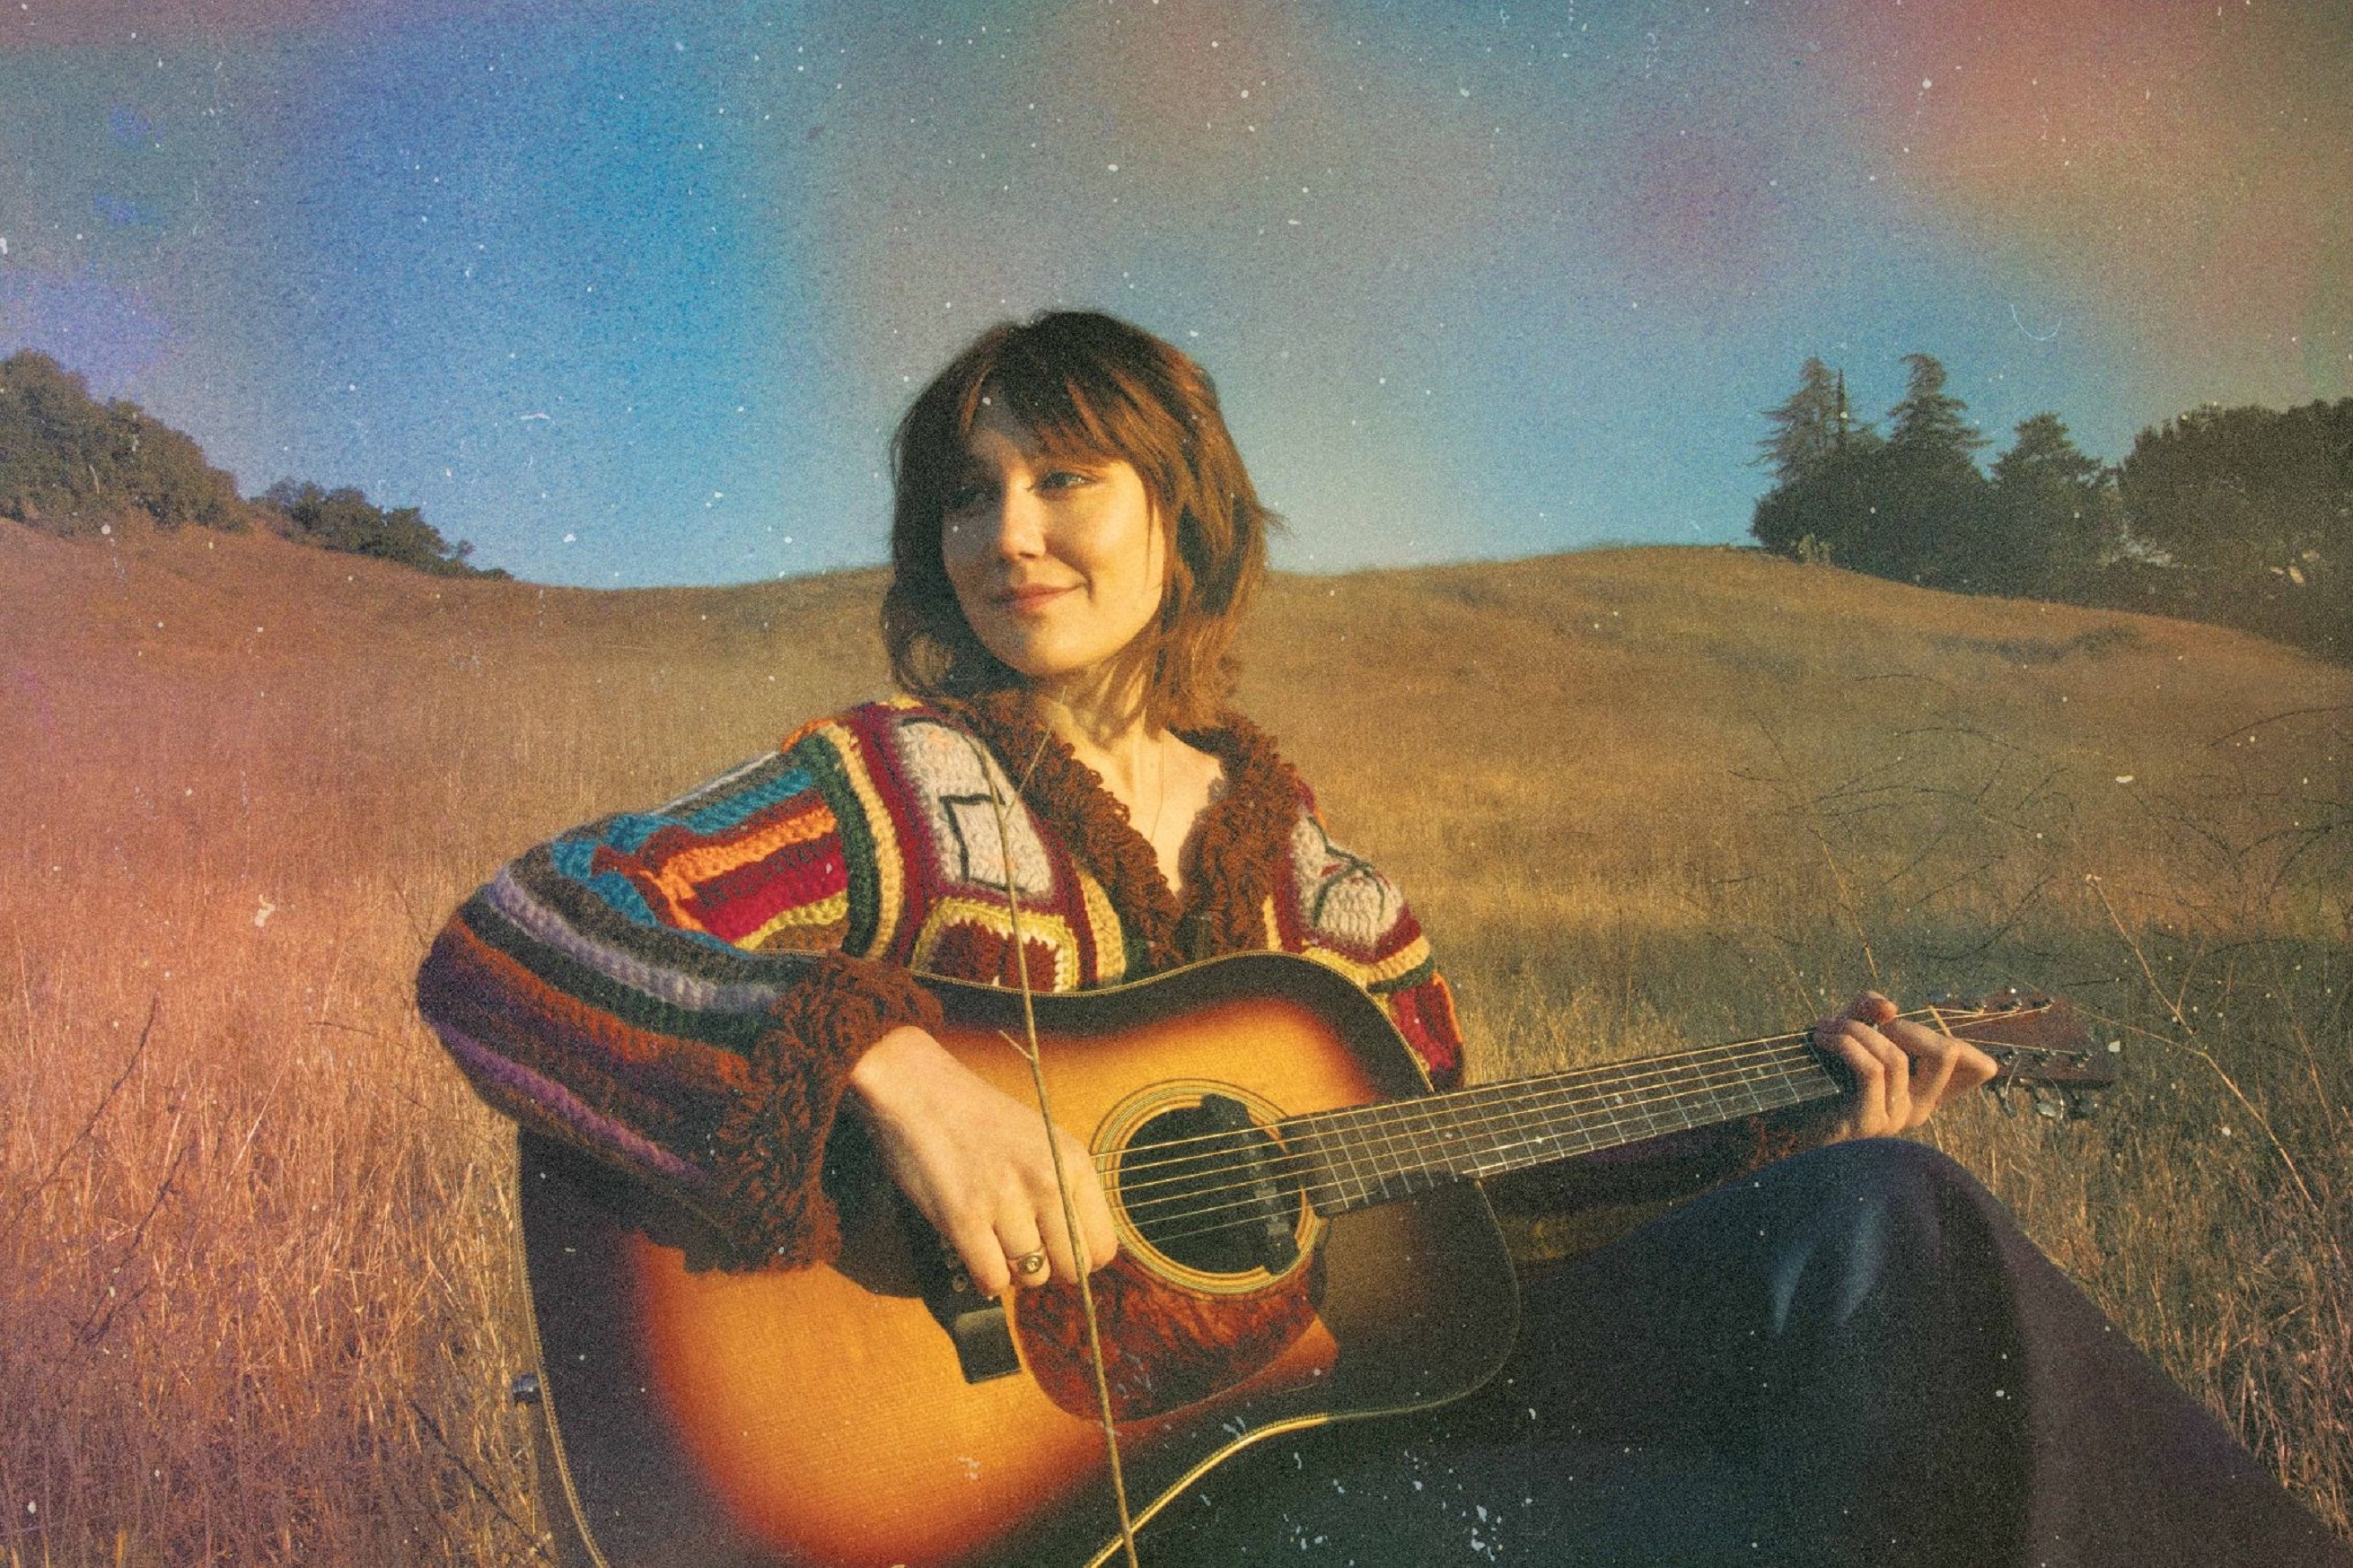 Molly Tuttle & Golden Highway to play the Fox Theatre on 2/27/22